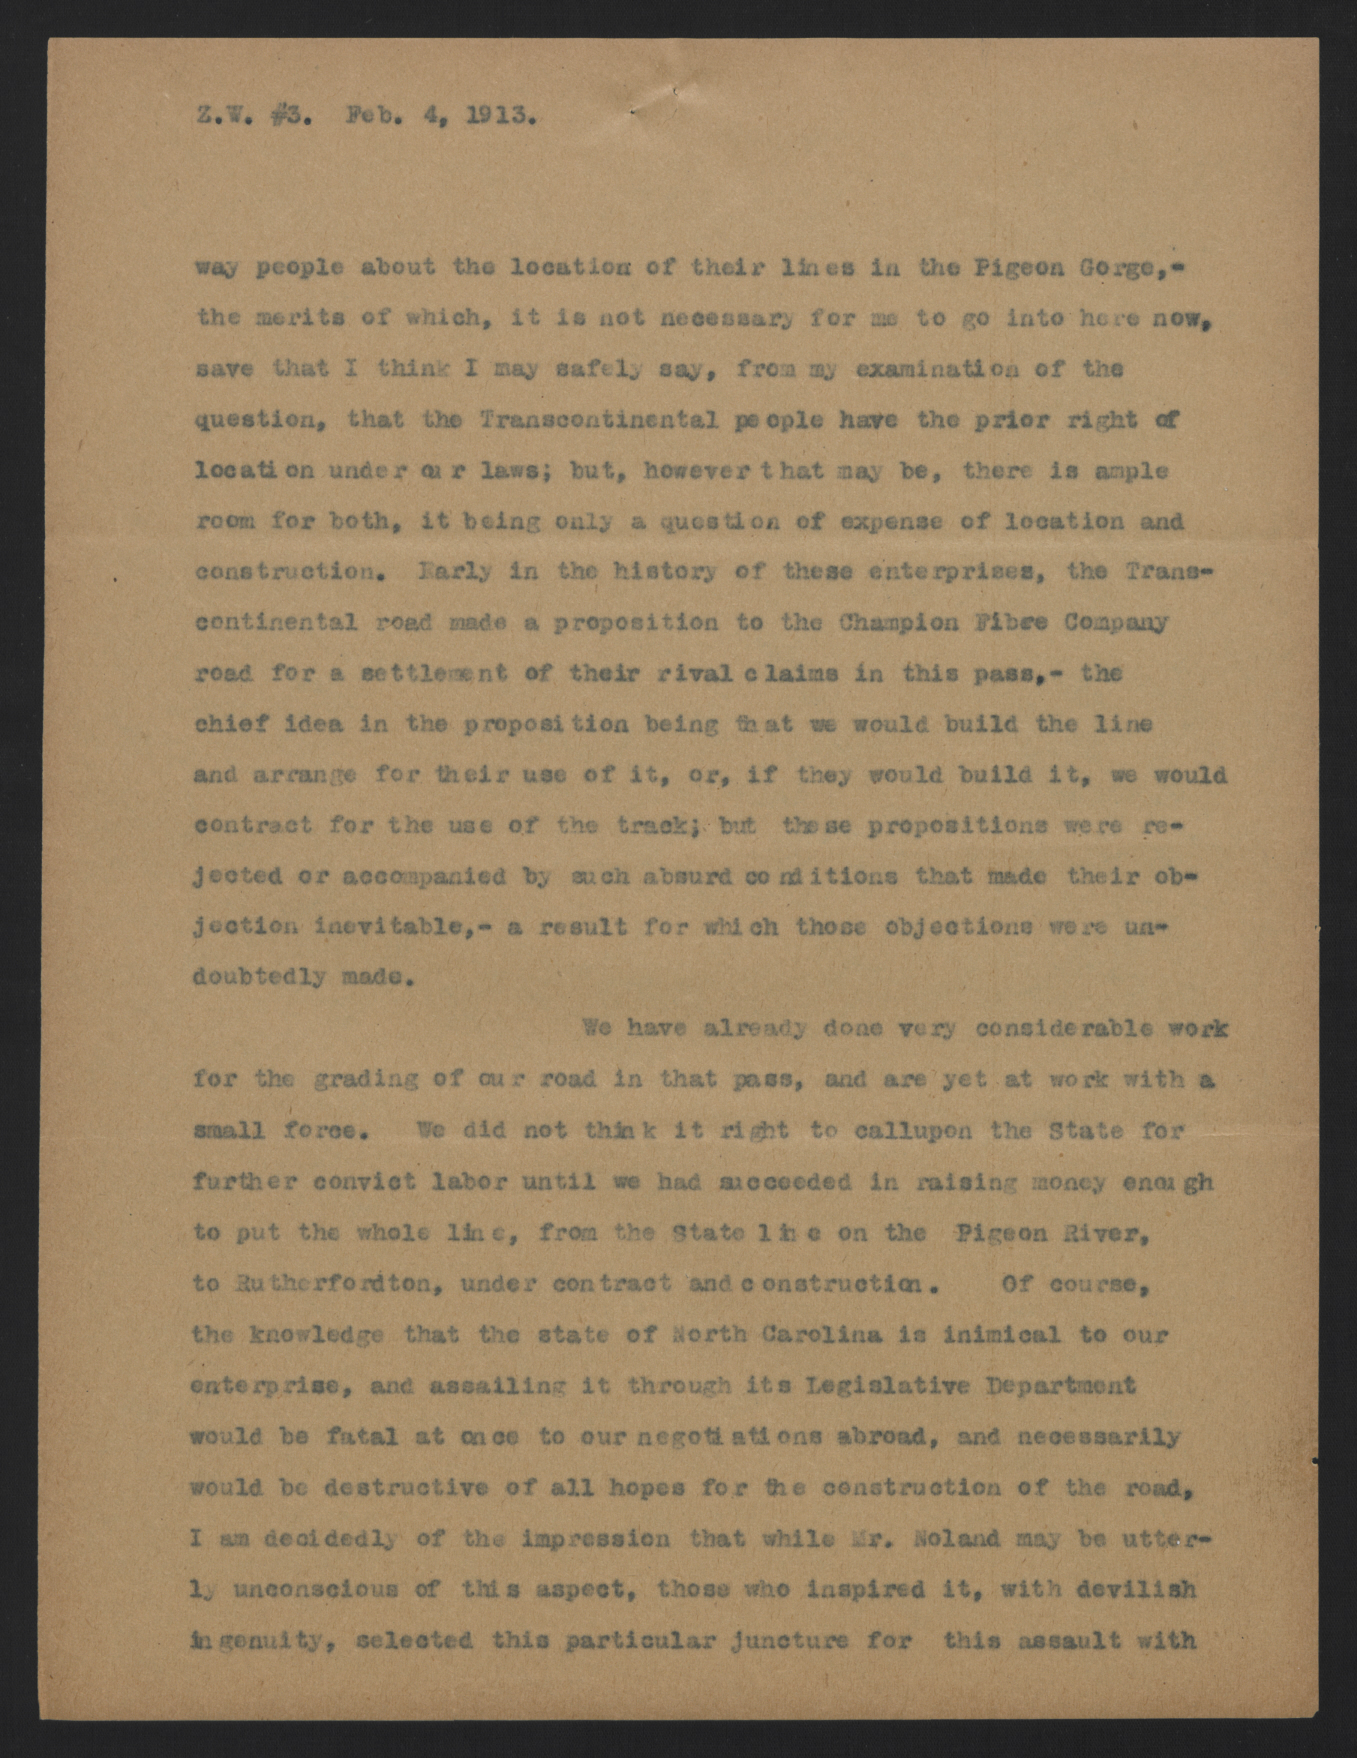 Letter from Davidson to Weaver, February 4, 1913, page 3